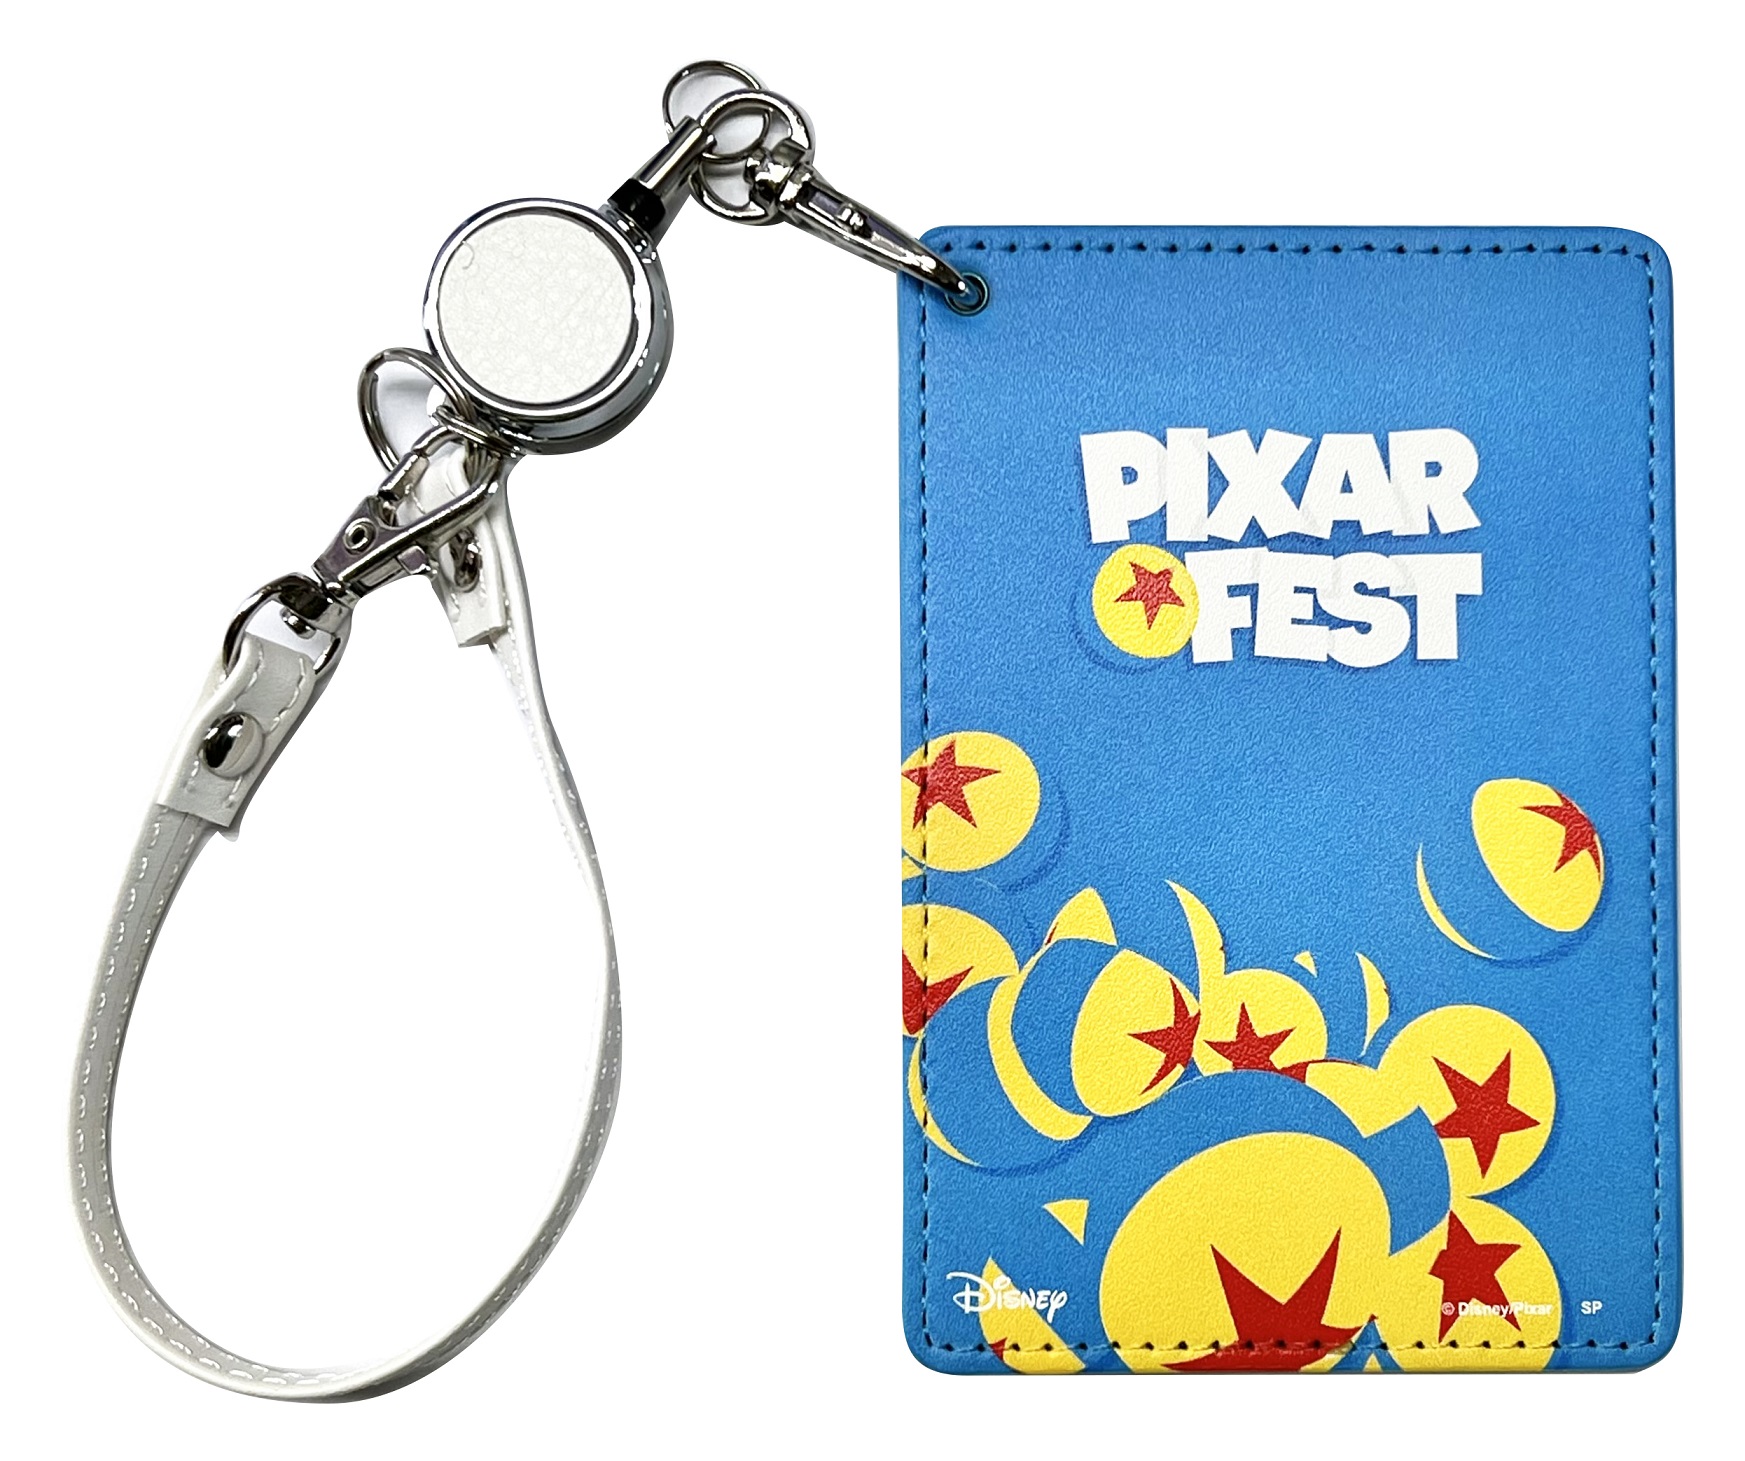 PIXAR FEST POP UP STORE by Small Planet3